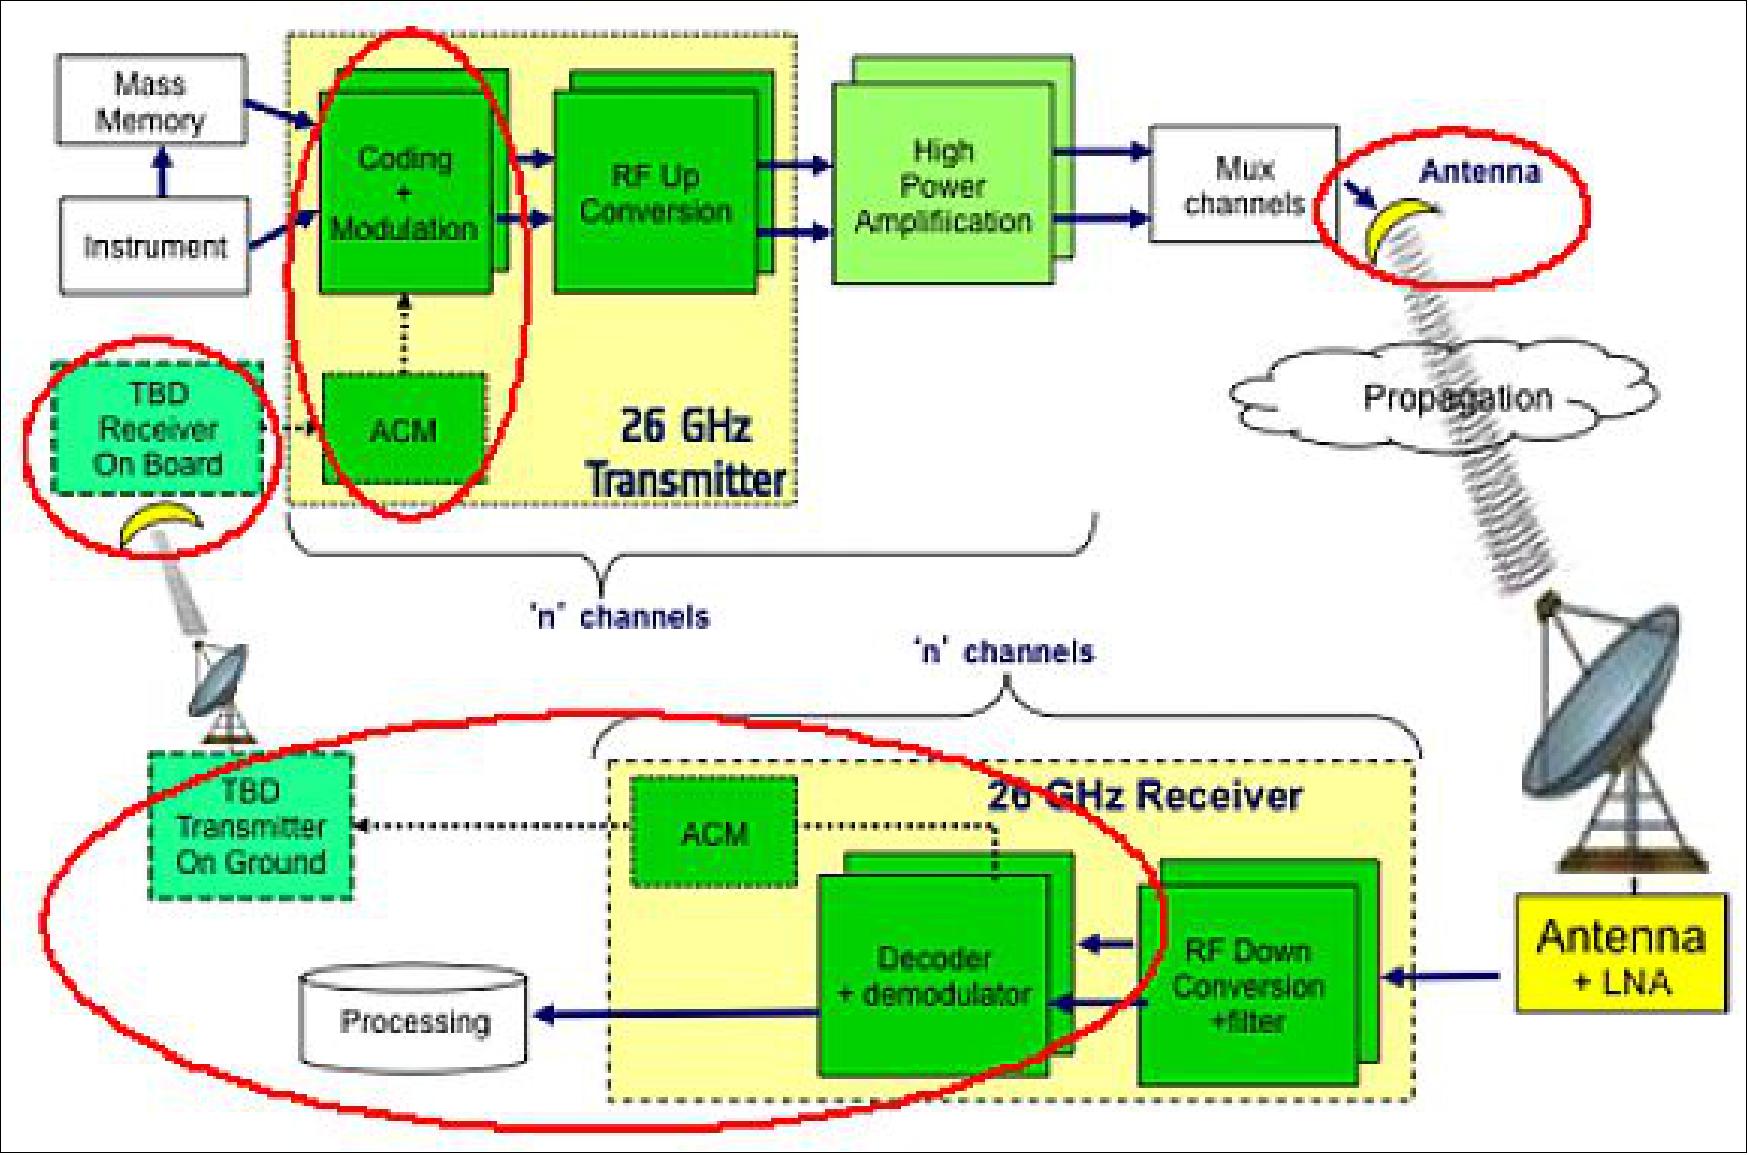 Figure 21: A model 26 GHz communications system. The figure was originally published in the IOAG 26 GHz study (Ref 24). The items circled in red are potential areas for study with SCaN Testbed (image credit: NASA/GRC)